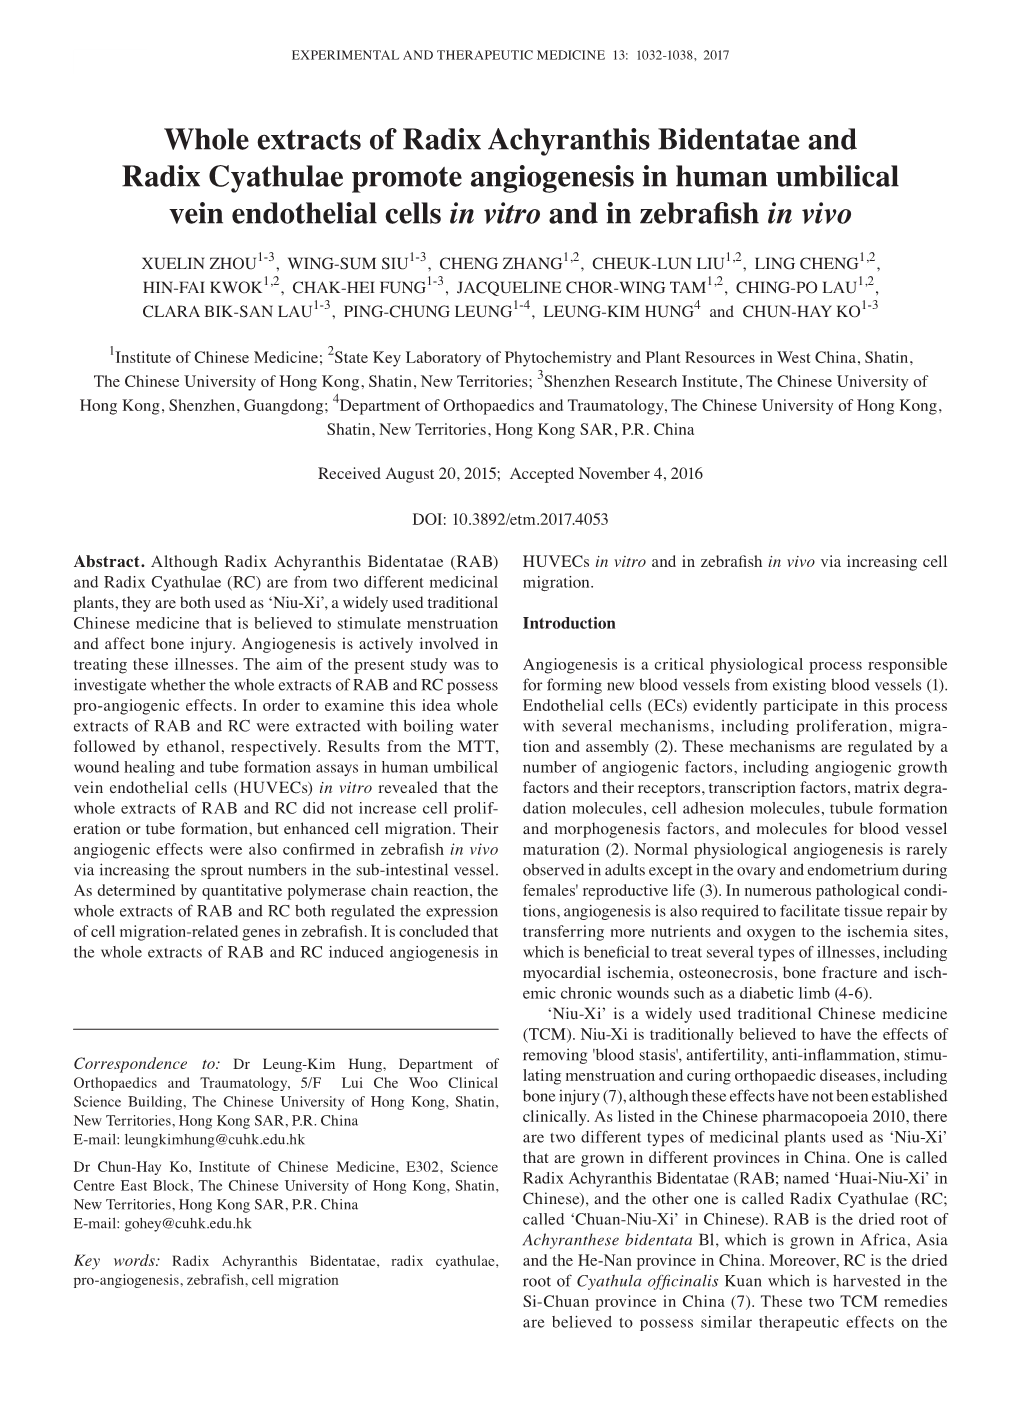 Whole Extracts of Radix Achyranthis Bidentatae and Radix Cyathulae Promote Angiogenesis in Human Umbilical Vein Endothelial Cells in Vitro and in Zebrafish in Vivo